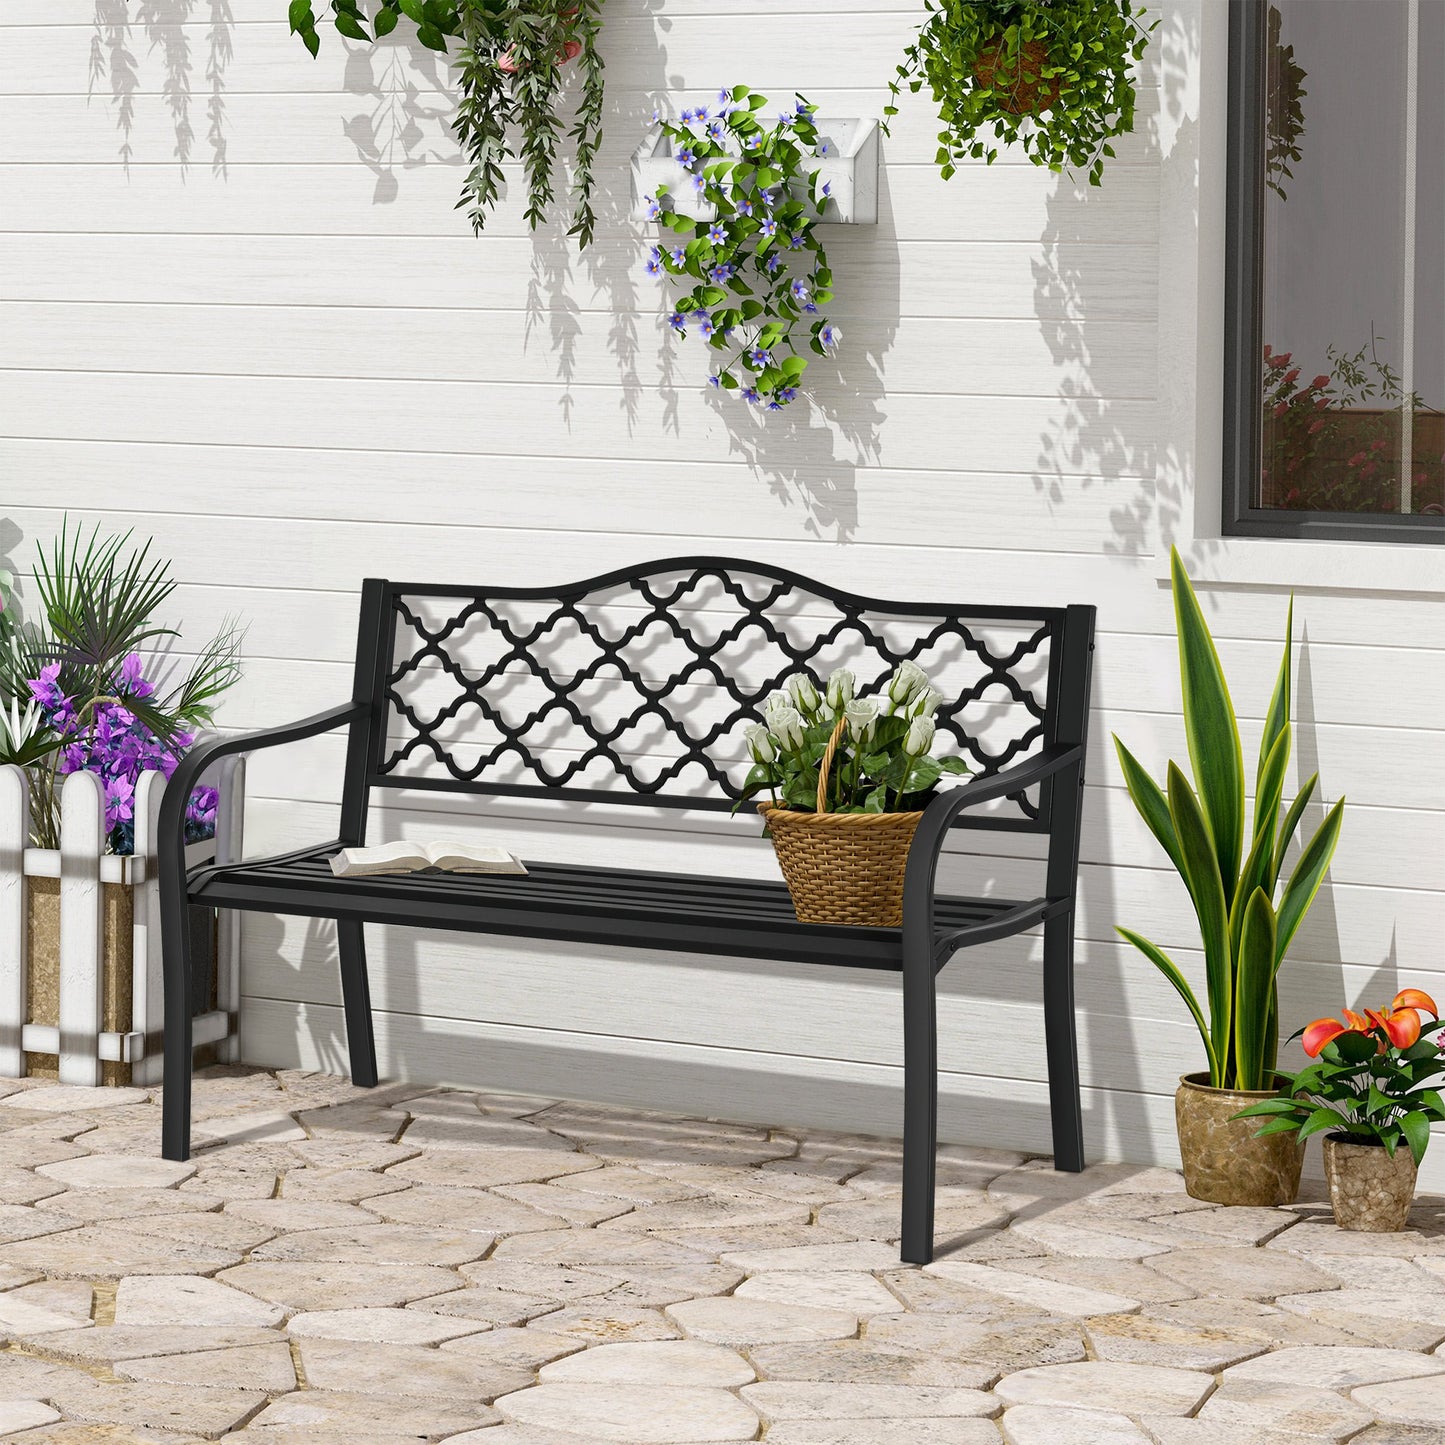 Outsunny 2-Seater Outdoor Garden Bench Antique Park Loveseat Chair with Armrest for Yard, Lawn, Porch, Patio, Steel